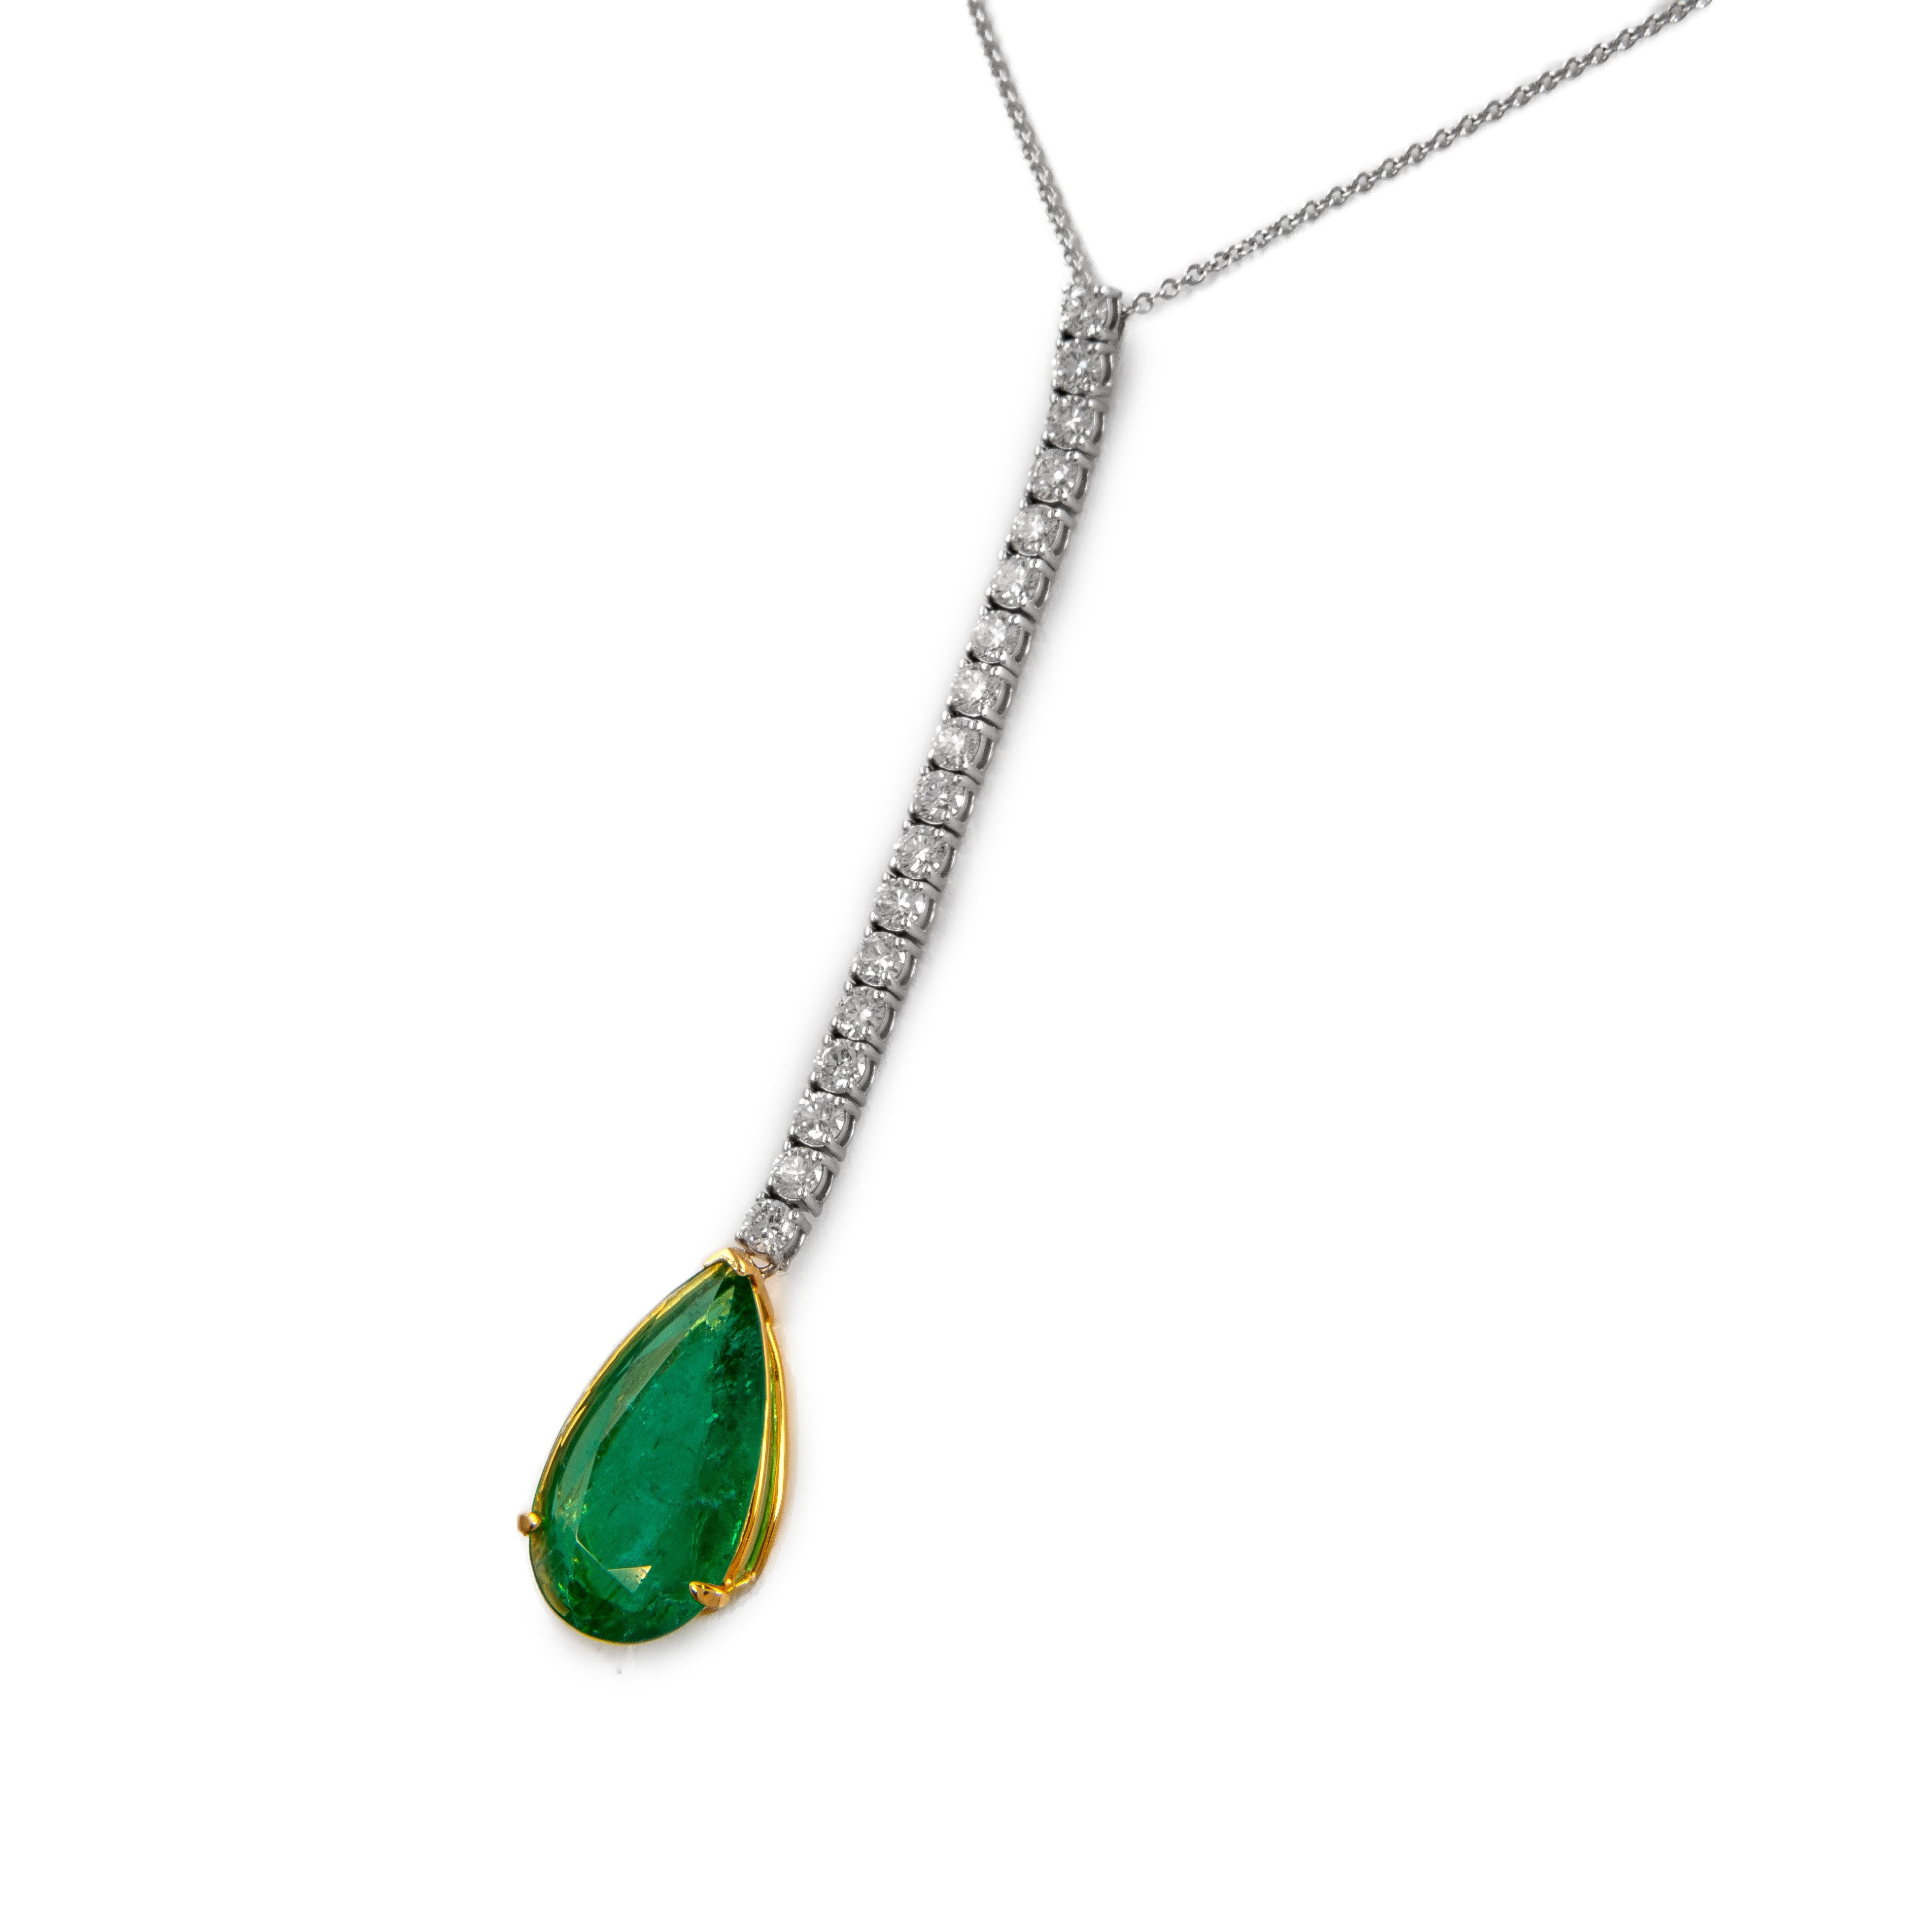 Contemporary 20.16ct Pear Emerald with Diamond Halo 18k White Gold Pendant Necklace For Sale